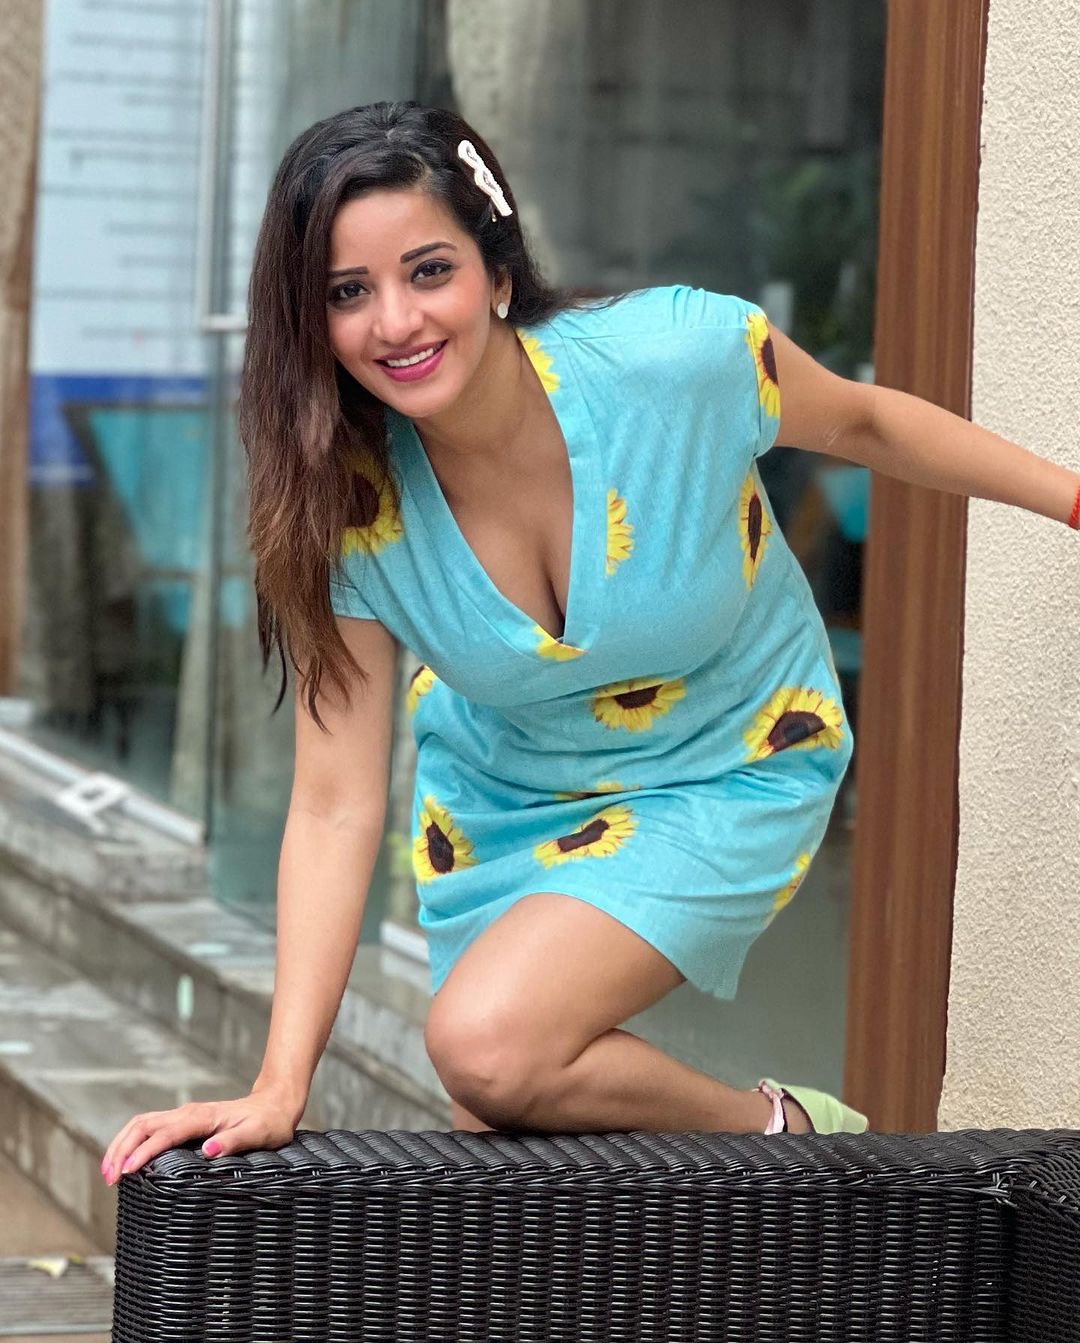 What are some best beach dresses to wear in India? - Quora